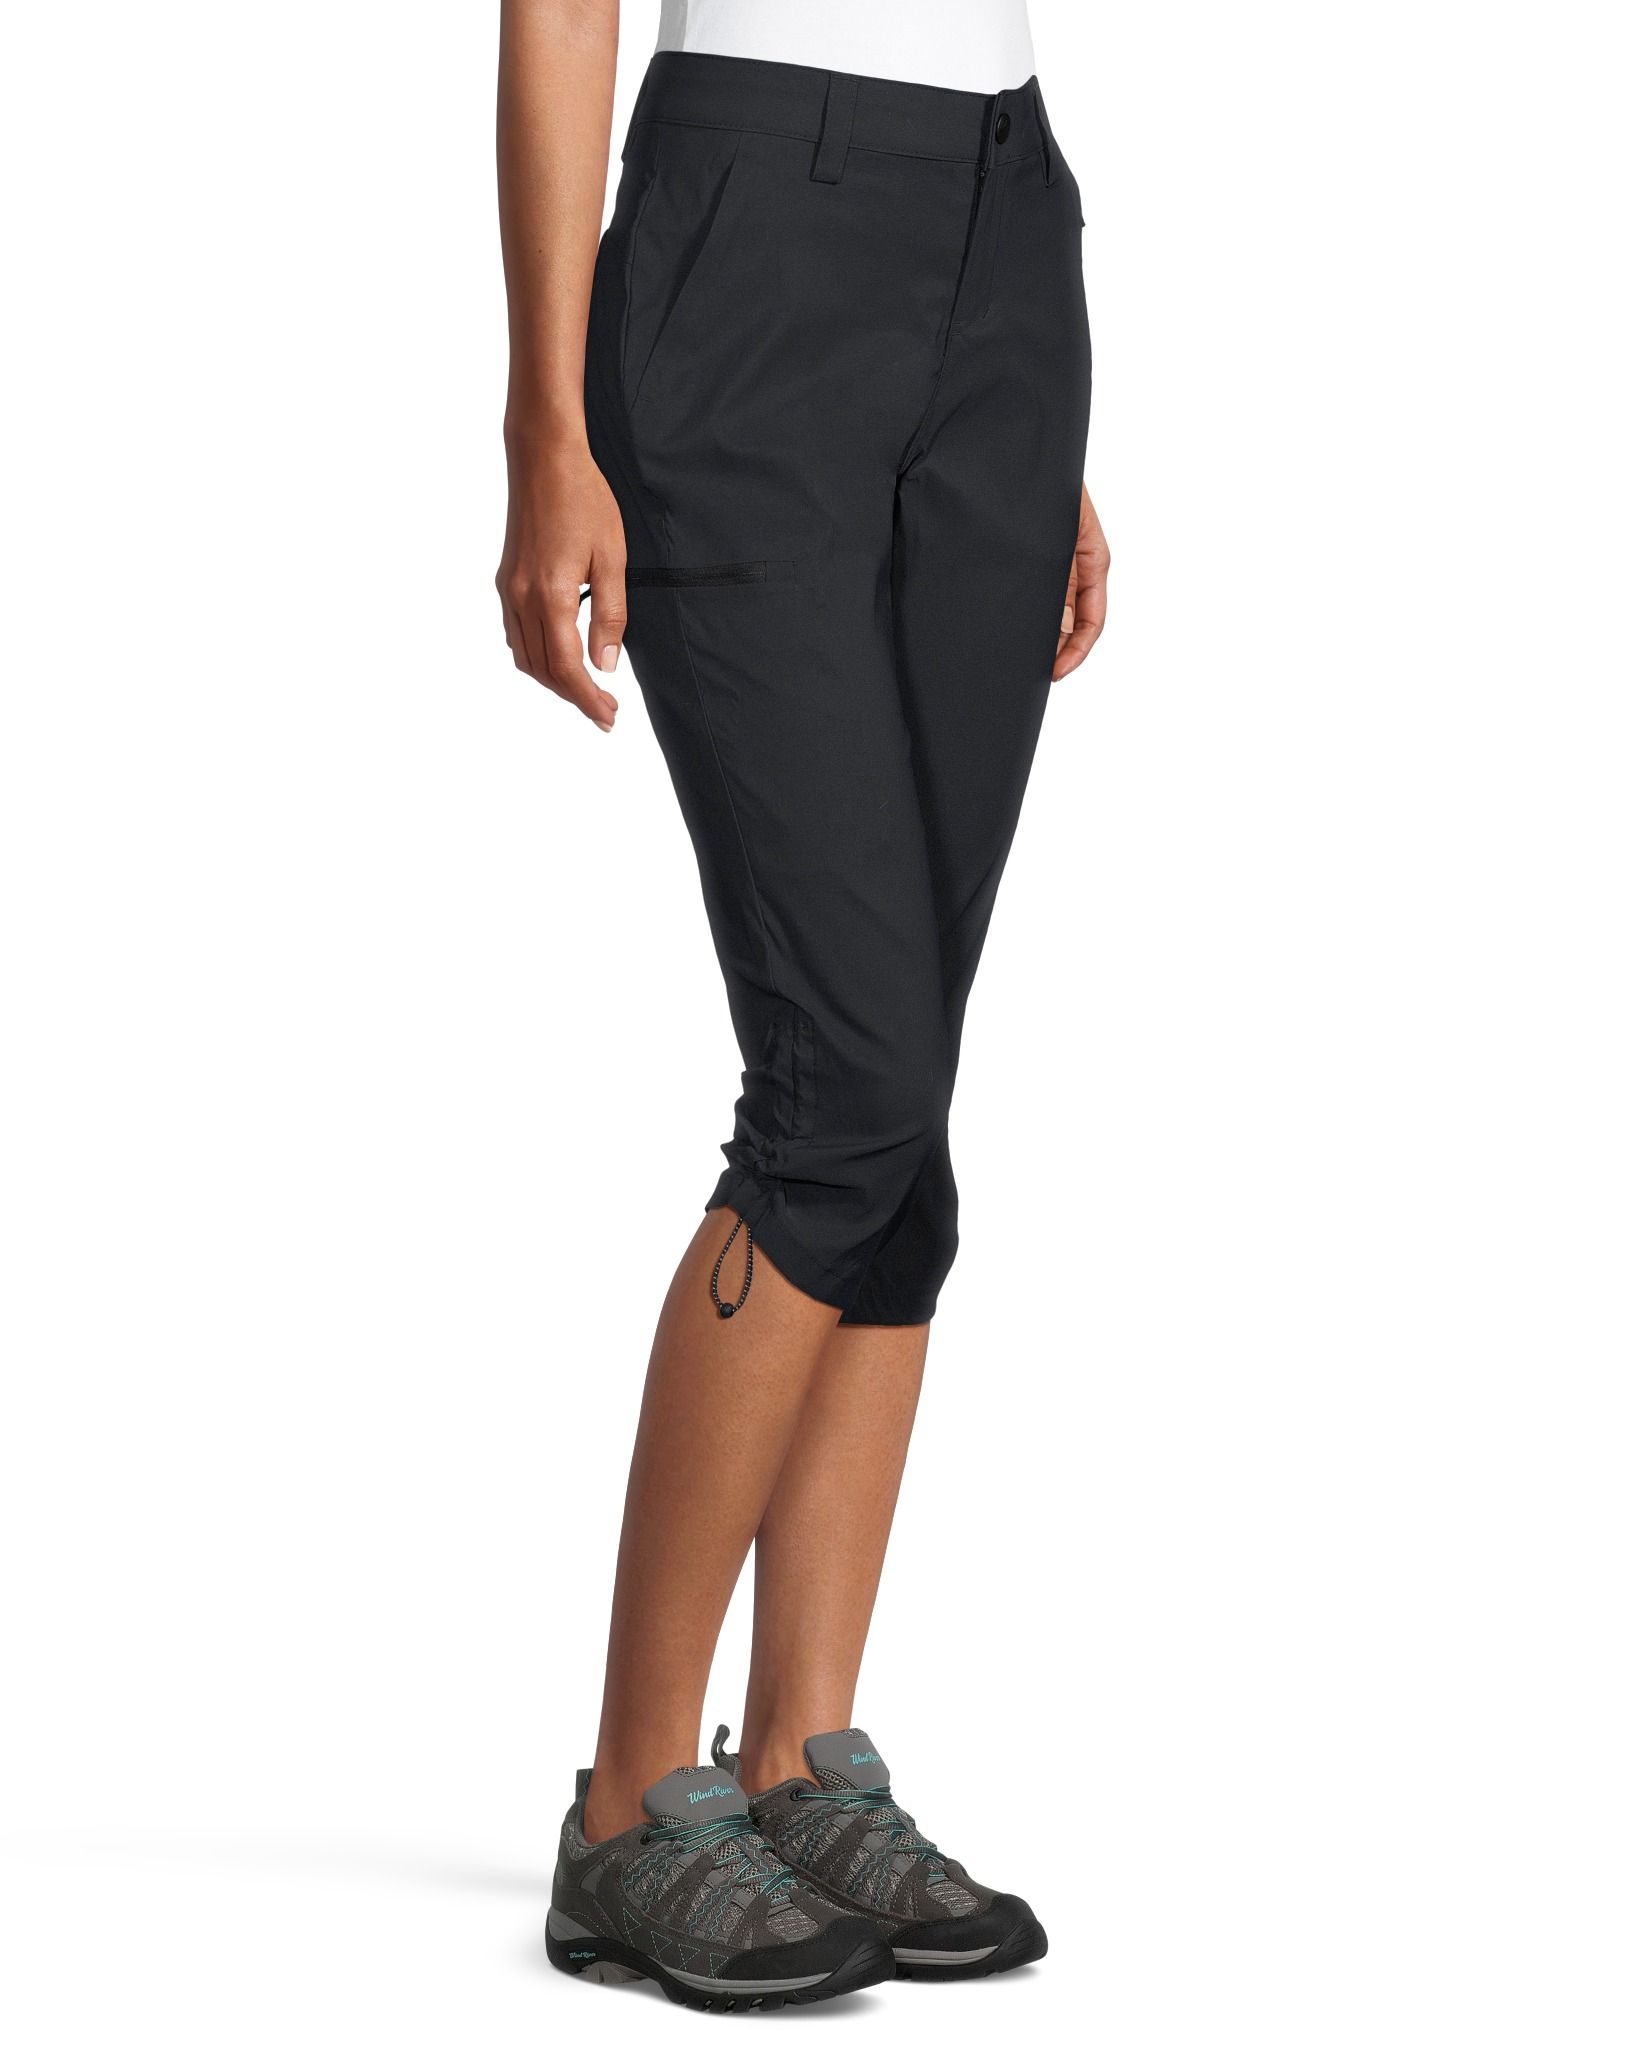 https://media-www.marks.com/product/marks-work-wearhouse/ladies-world/ladies-casual-dress-bottoms/410034952457/windriver-women-s-water-repellent-hyper-dri-1-hiking-capri-pants-2589879c-3599-4c56-baa8-a85c3be3a49c-jpgrendition.jpg?imdensity=1&imwidth=1244&impolicy=mZoom